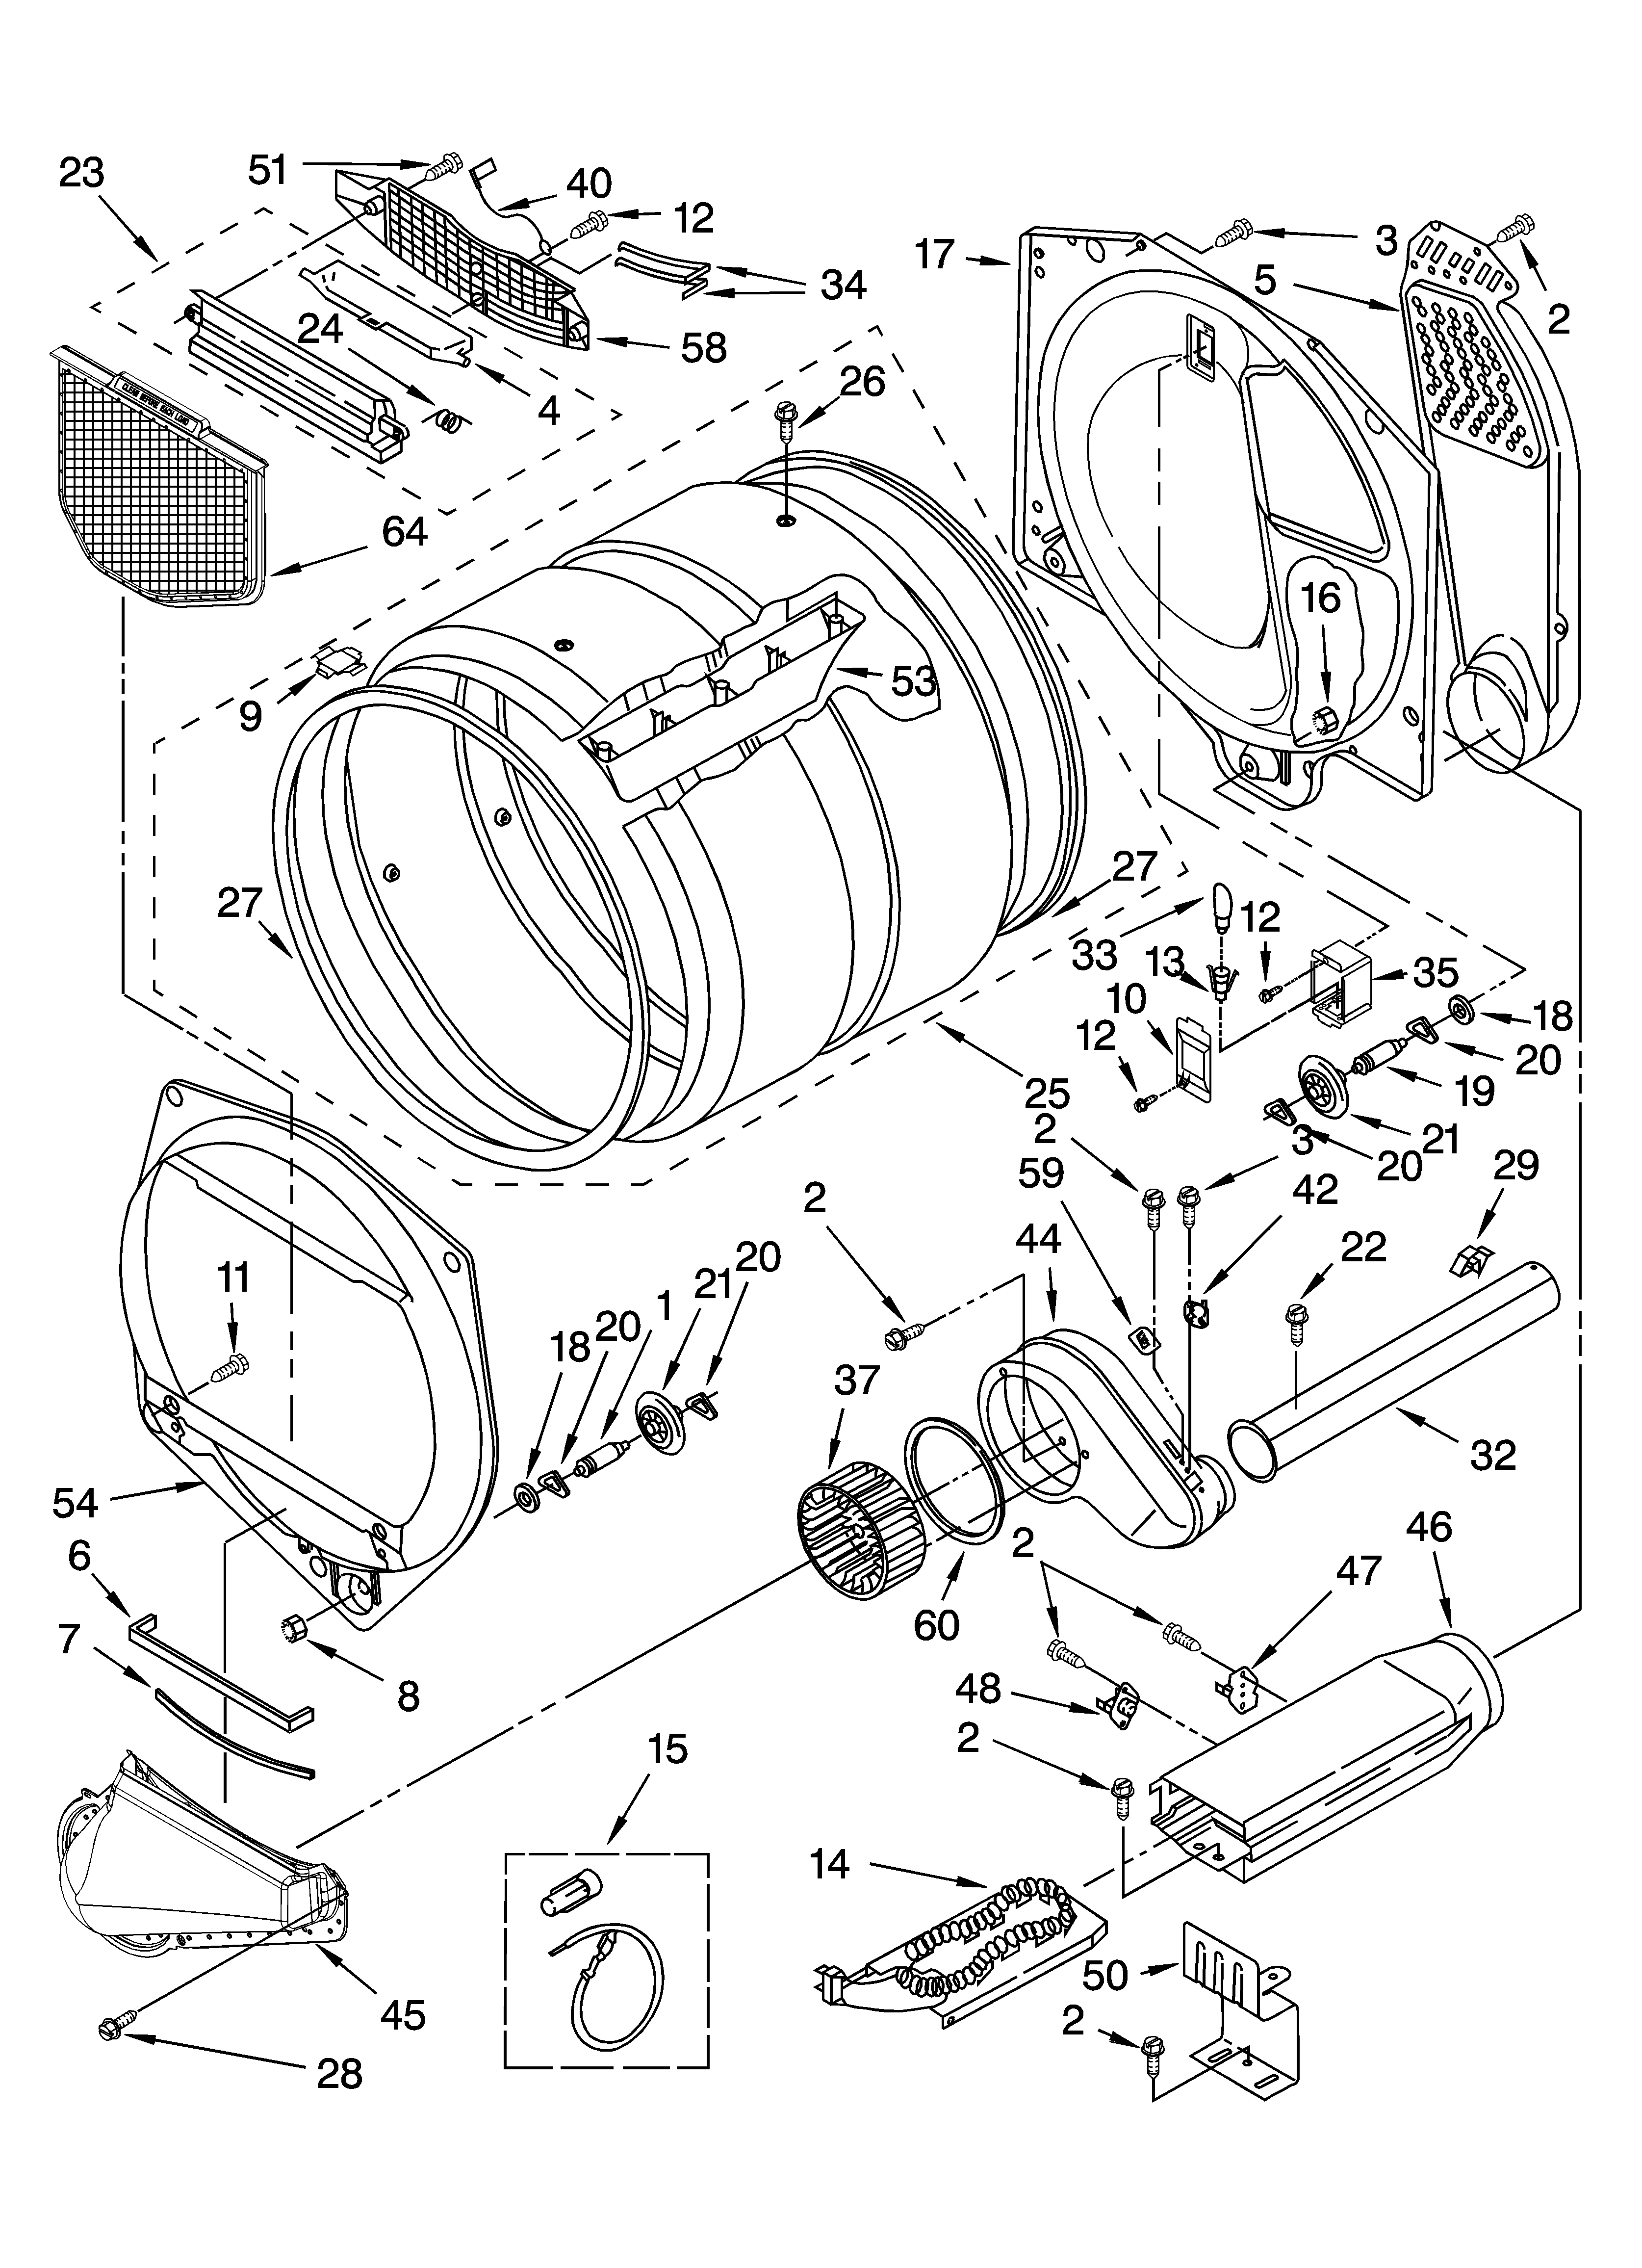 Whirlpool Ultimate Care Ii Washer Parts Diagram General Wiring Diagram